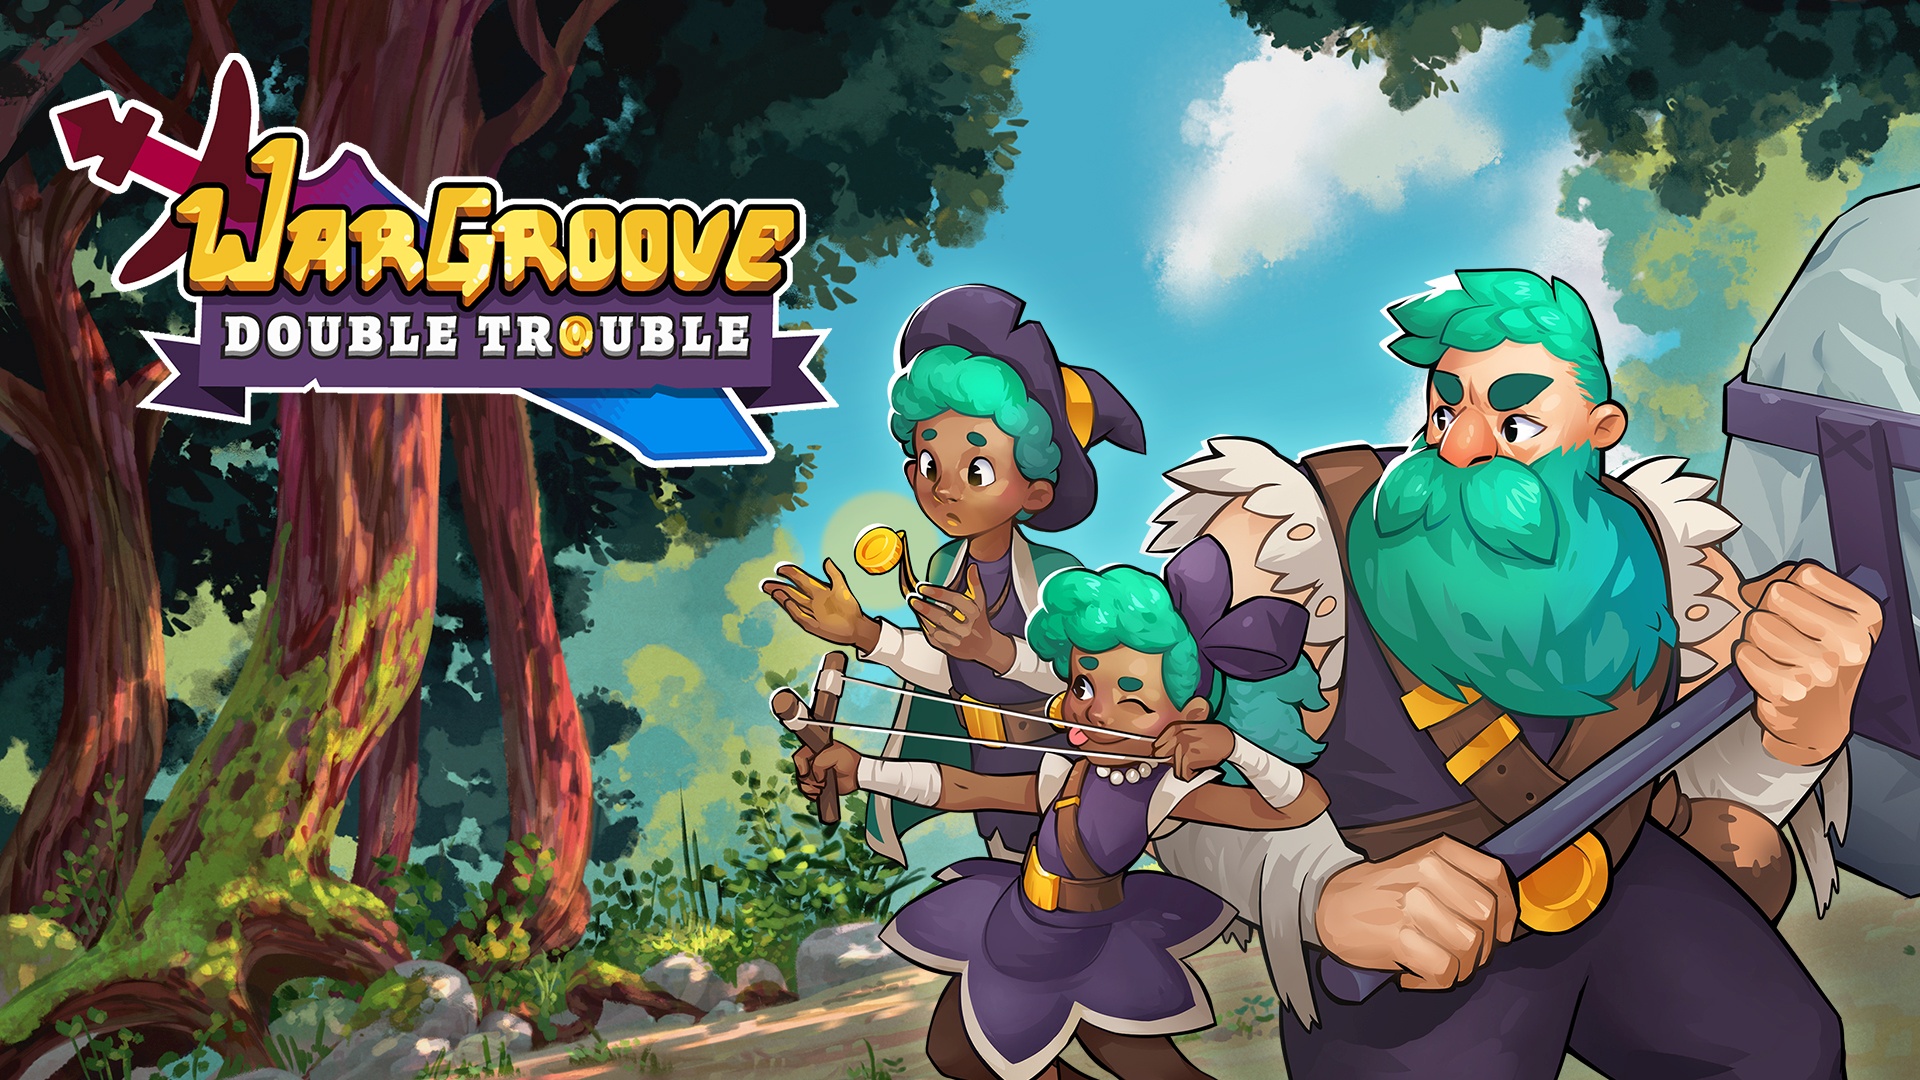 Wargroove: A Double Problem